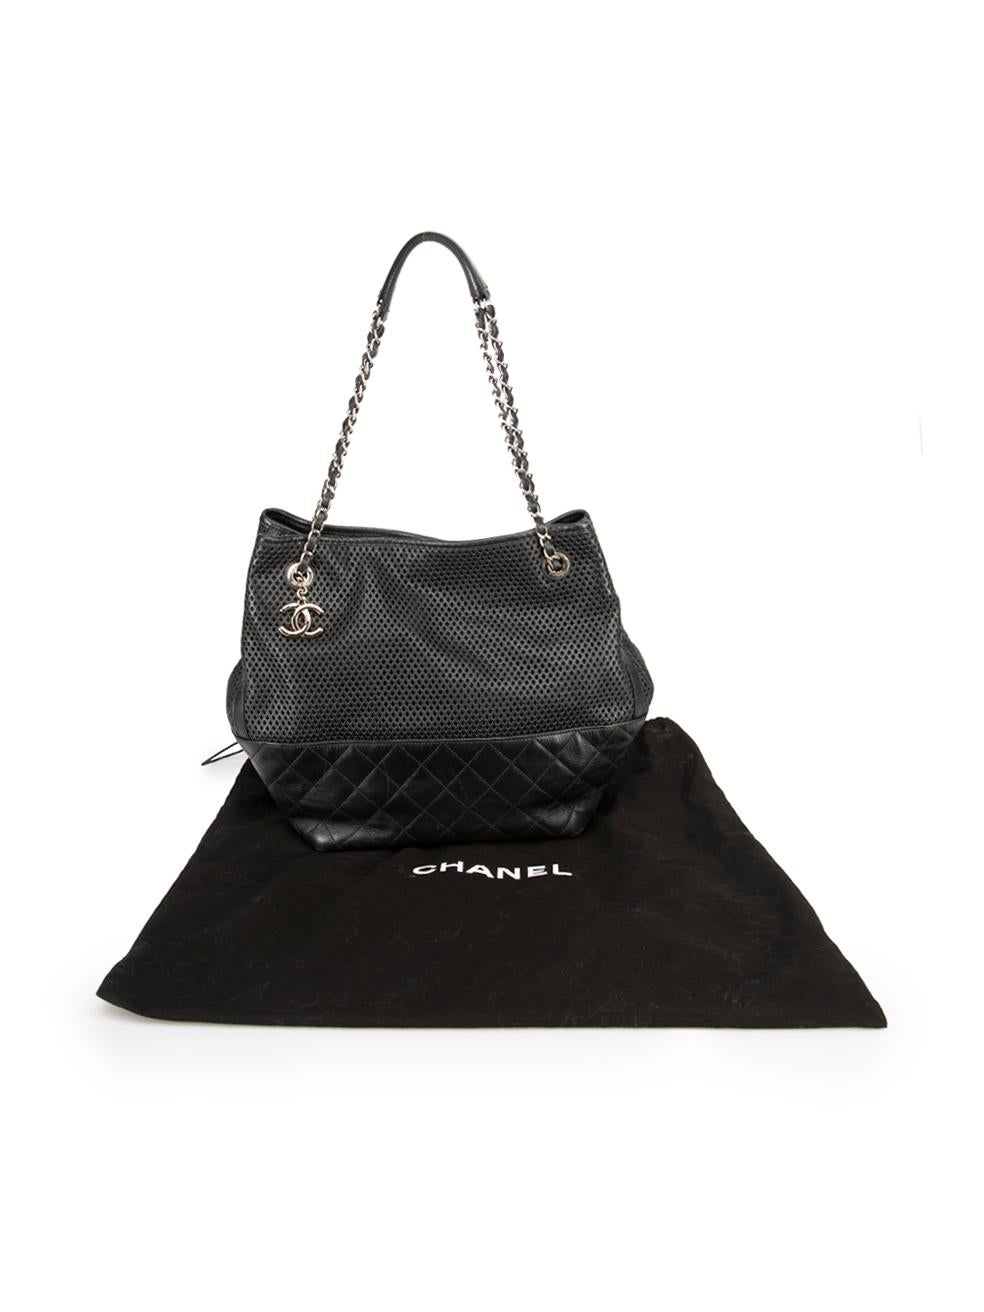 Chanel Women's Black Leather CC Up In The Air Tote For Sale 6